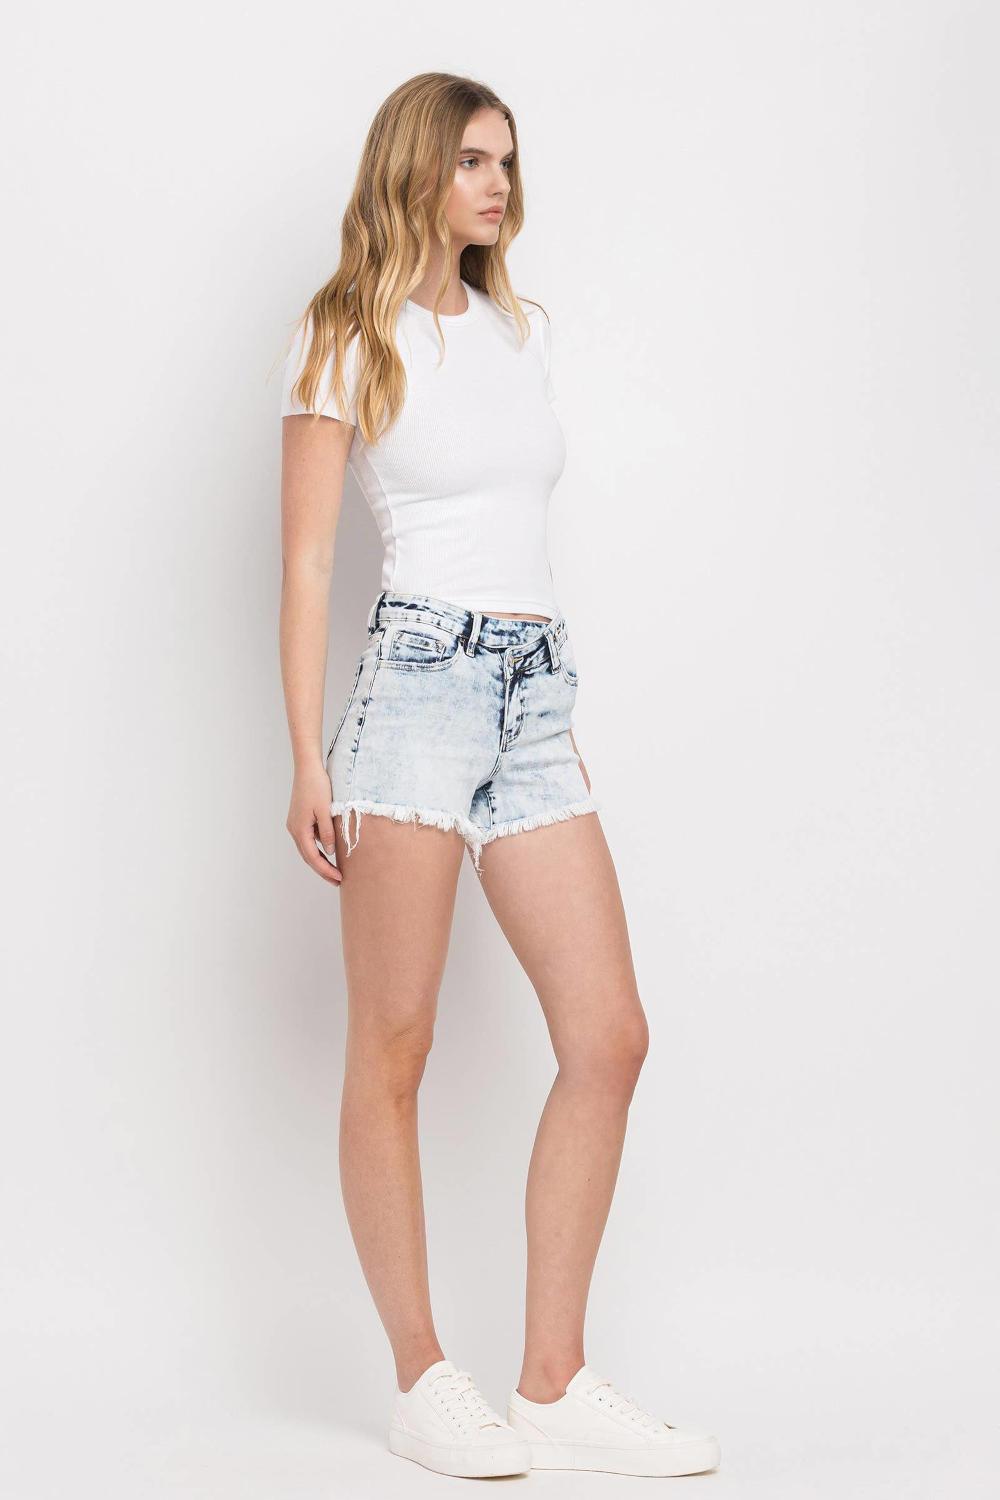 Puzzled Crossover Denim Shorts - Strawberry Moon Boutique